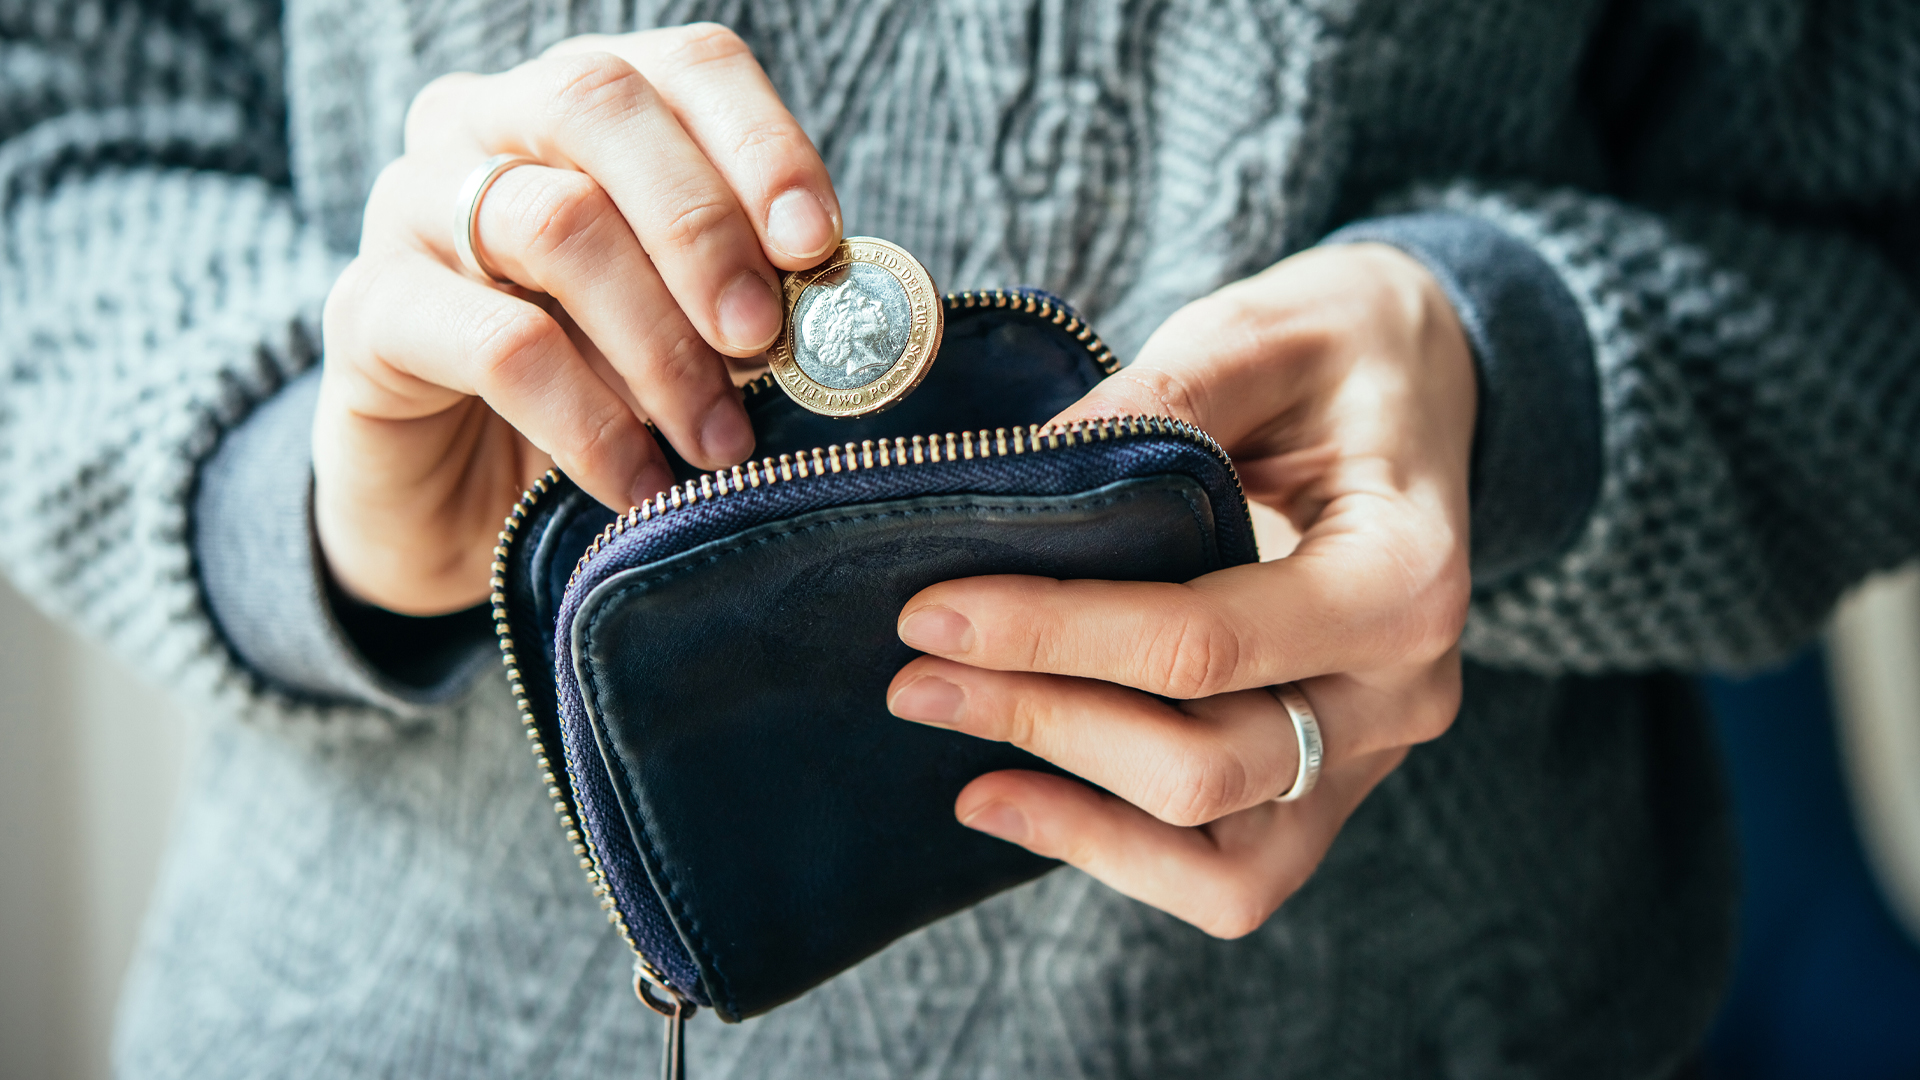 A person putting a coin in a purse